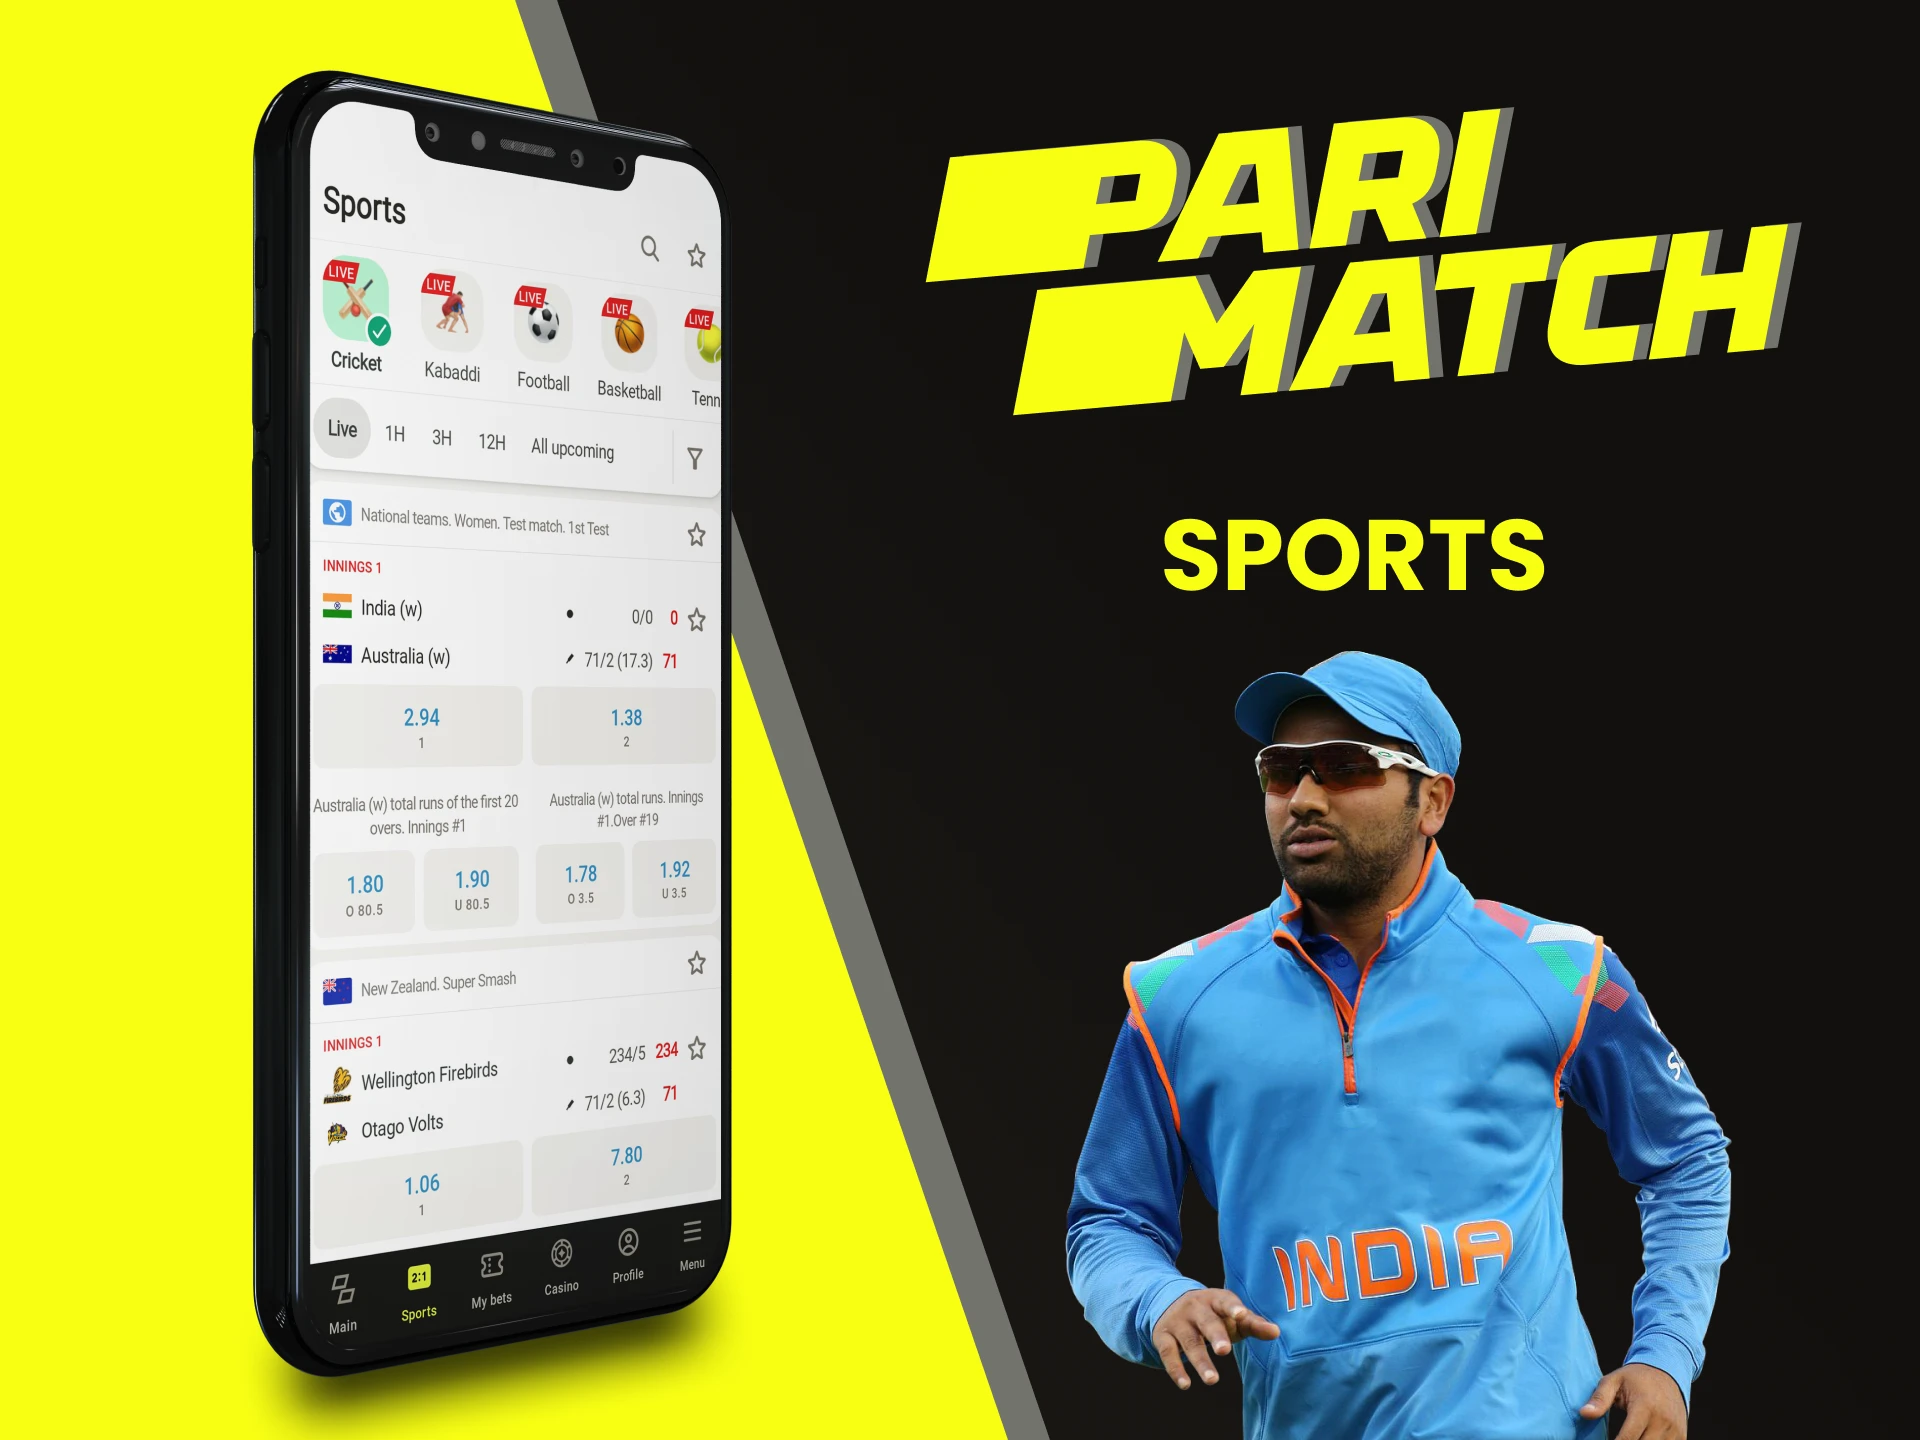 Place bets on sports using the Parimatch app.